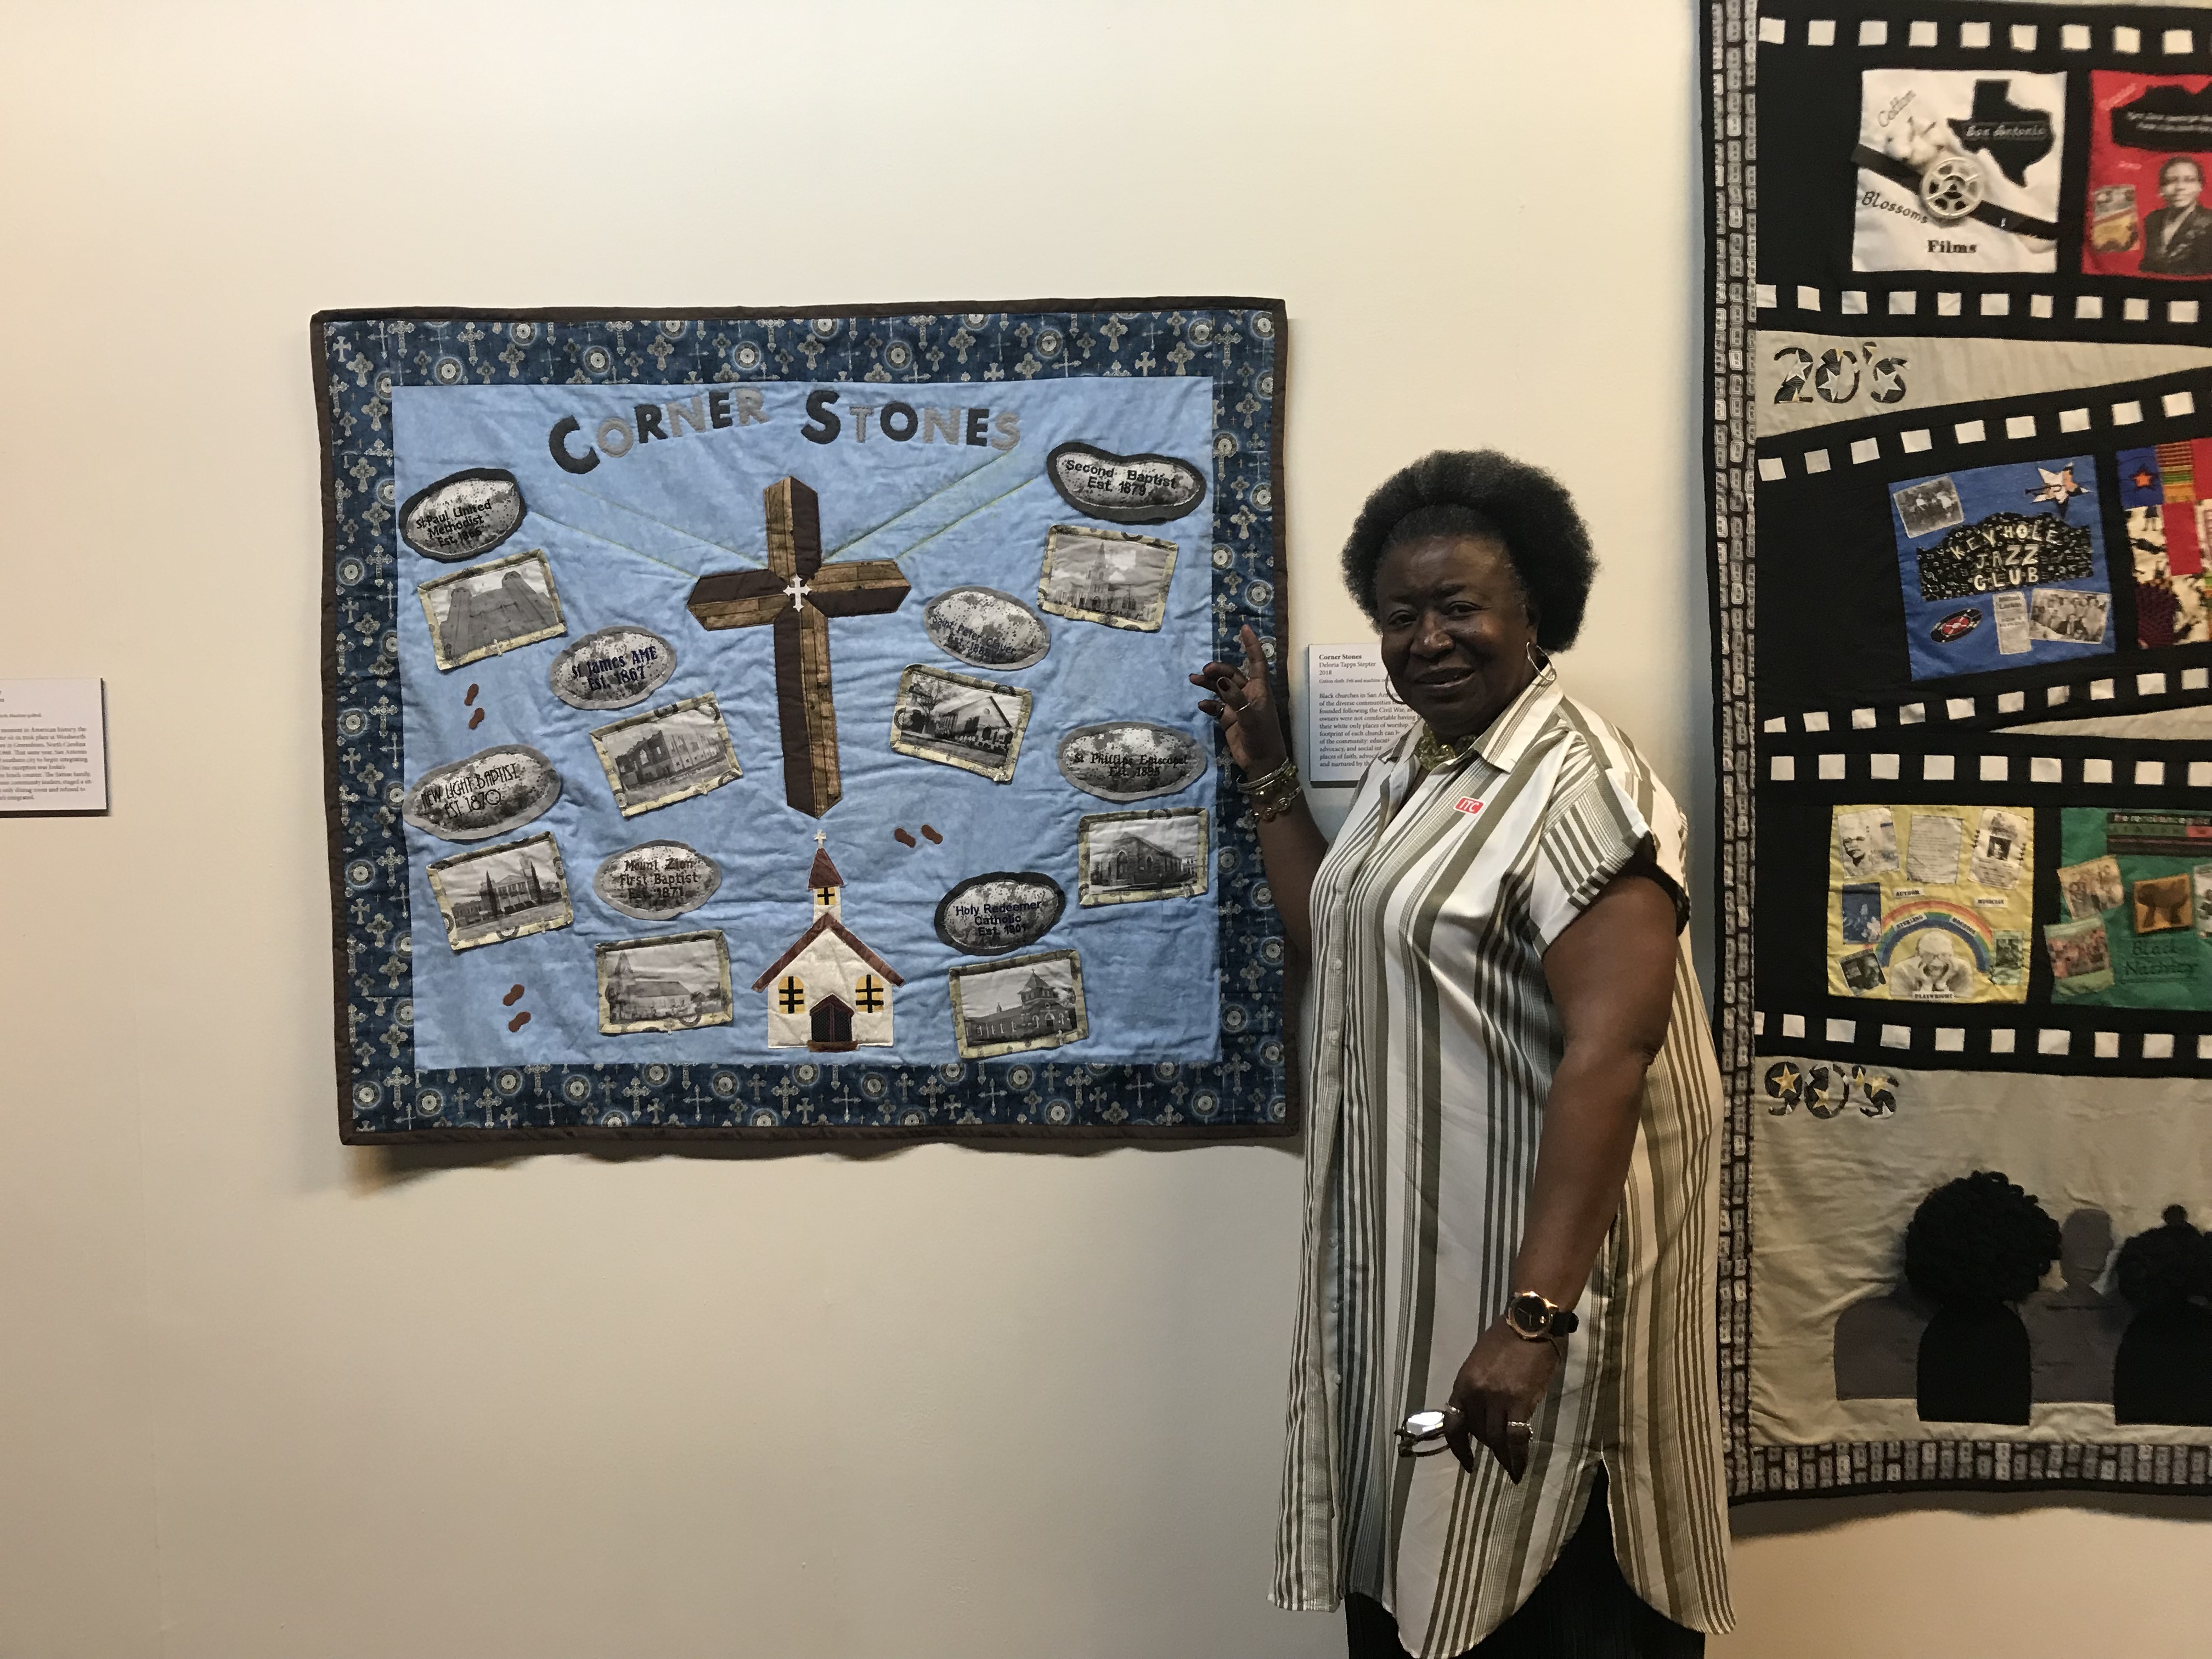 Telling Our Story: A Narrative Quilt Exhibit